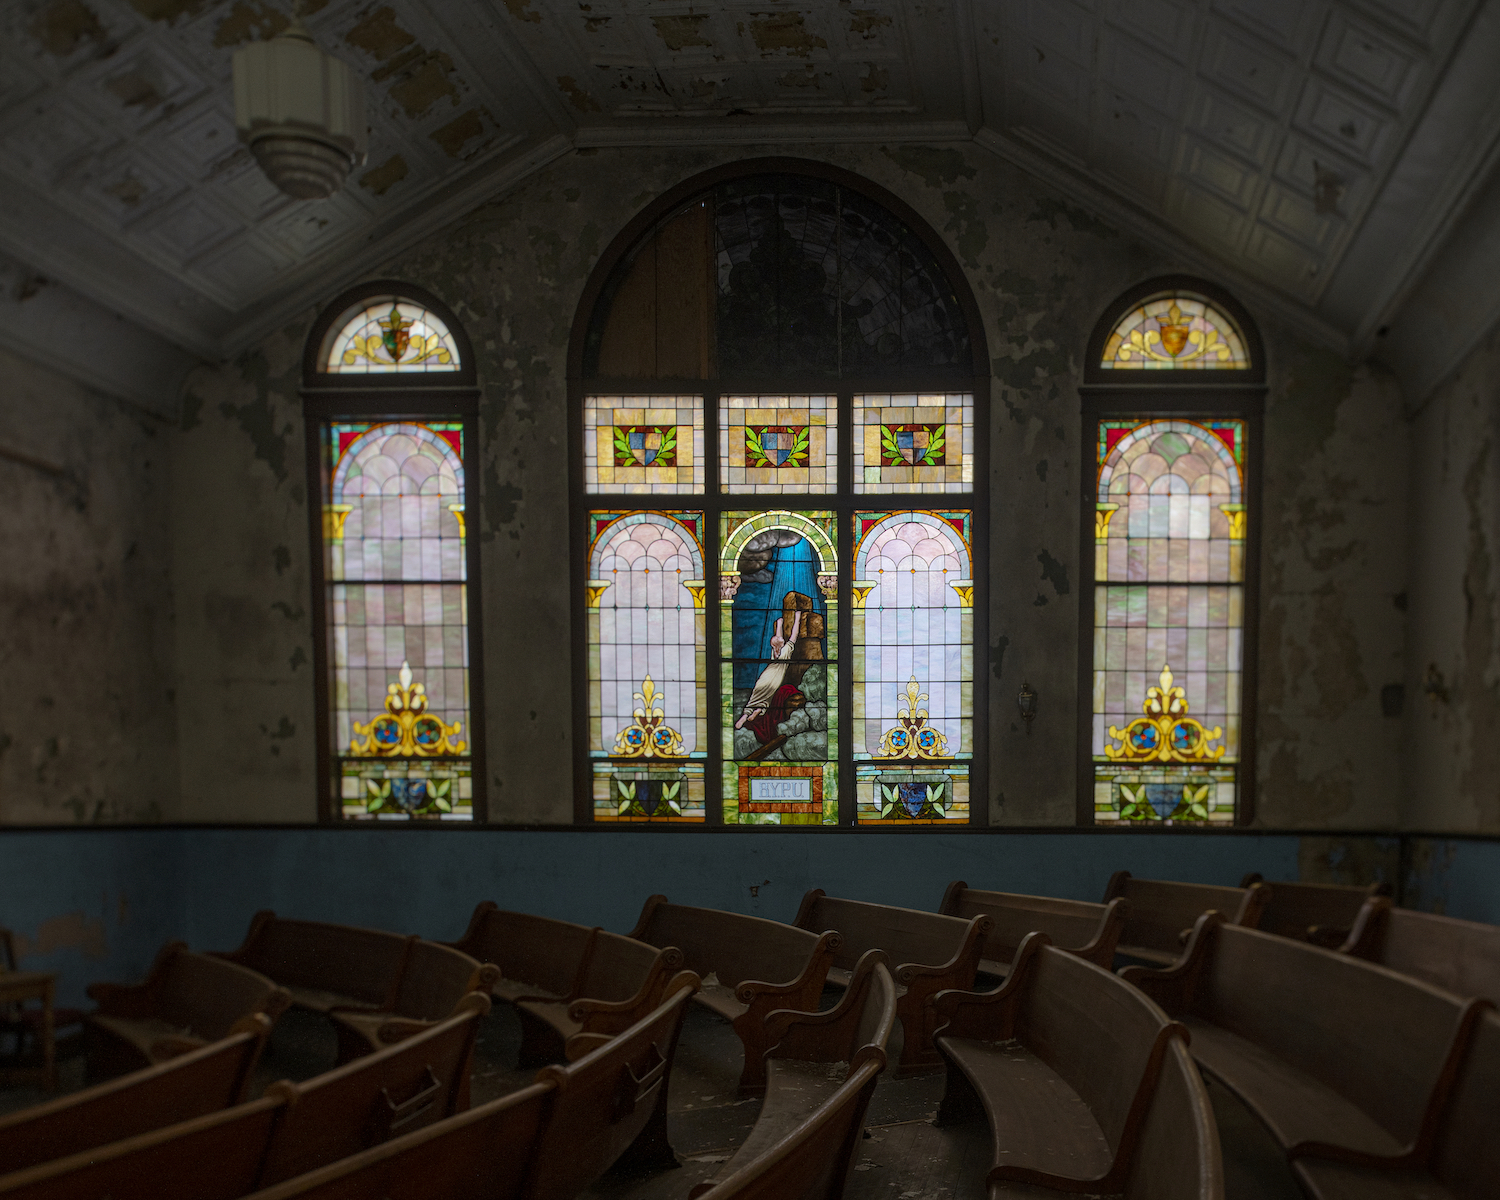 The windows of Mount Zion Baptist Church, the historic building stands at the intersection of Carpenter and Congress streets in uptown Athens as one of few remaining examples of Black American architecture in Southeastern Ohio.